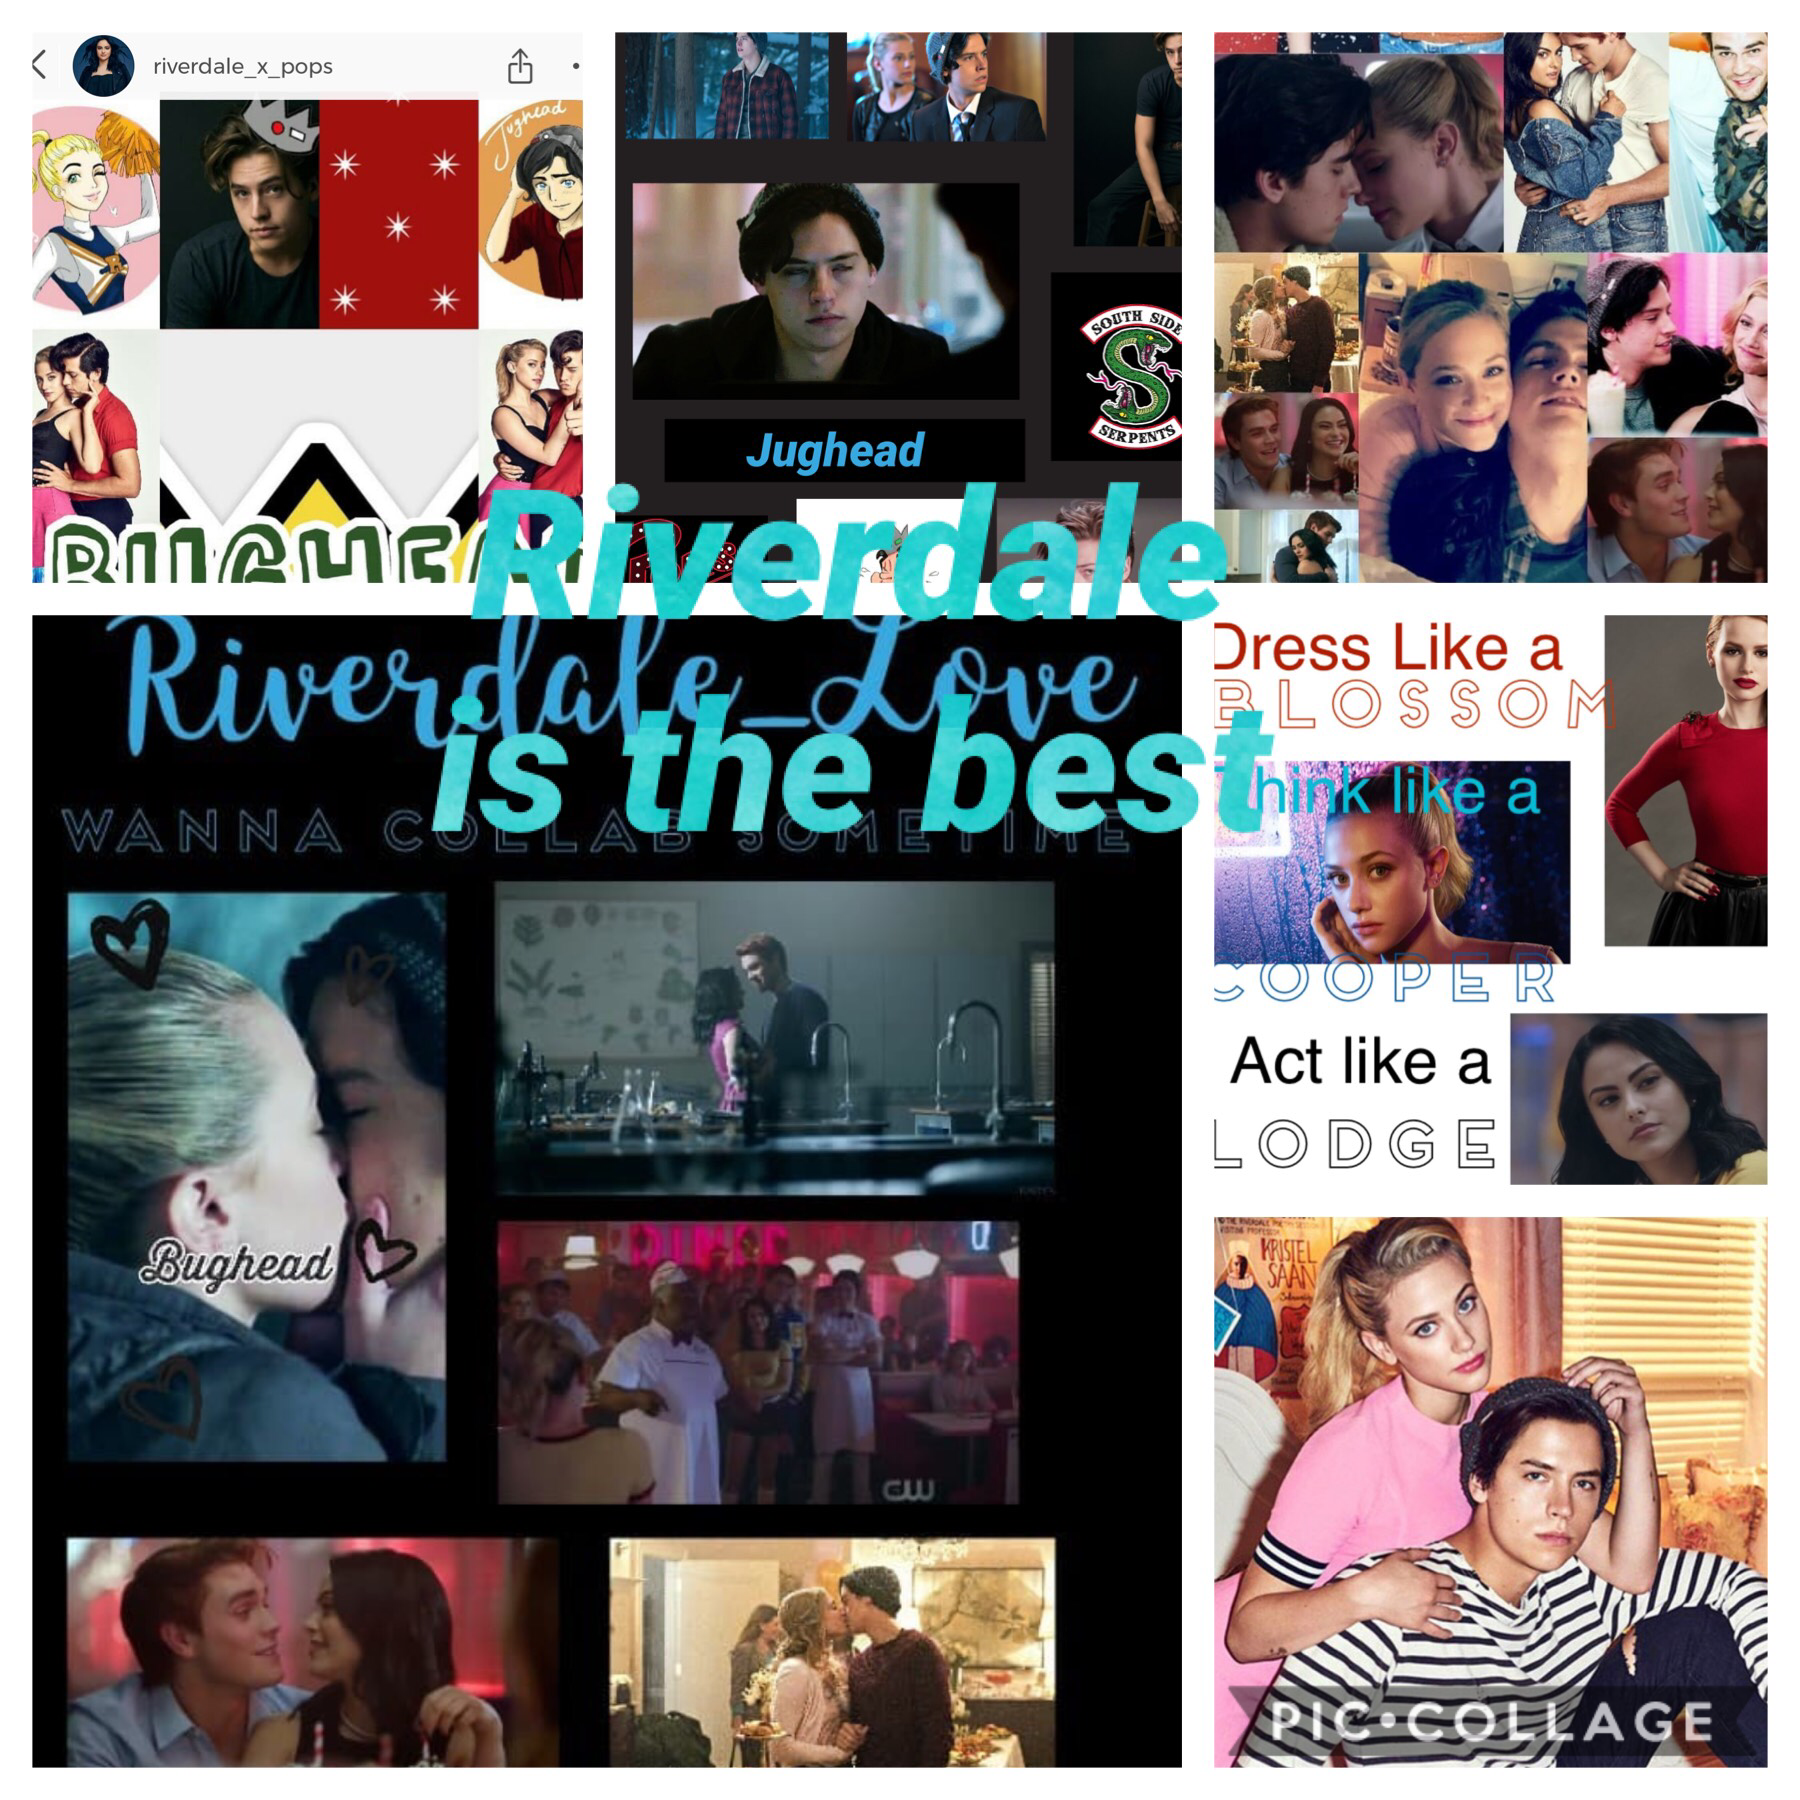 Riverdale is my  number one favorite show check my account and follow I am a riverdalelover ❤️💕❤️💕❤️😘😍😍